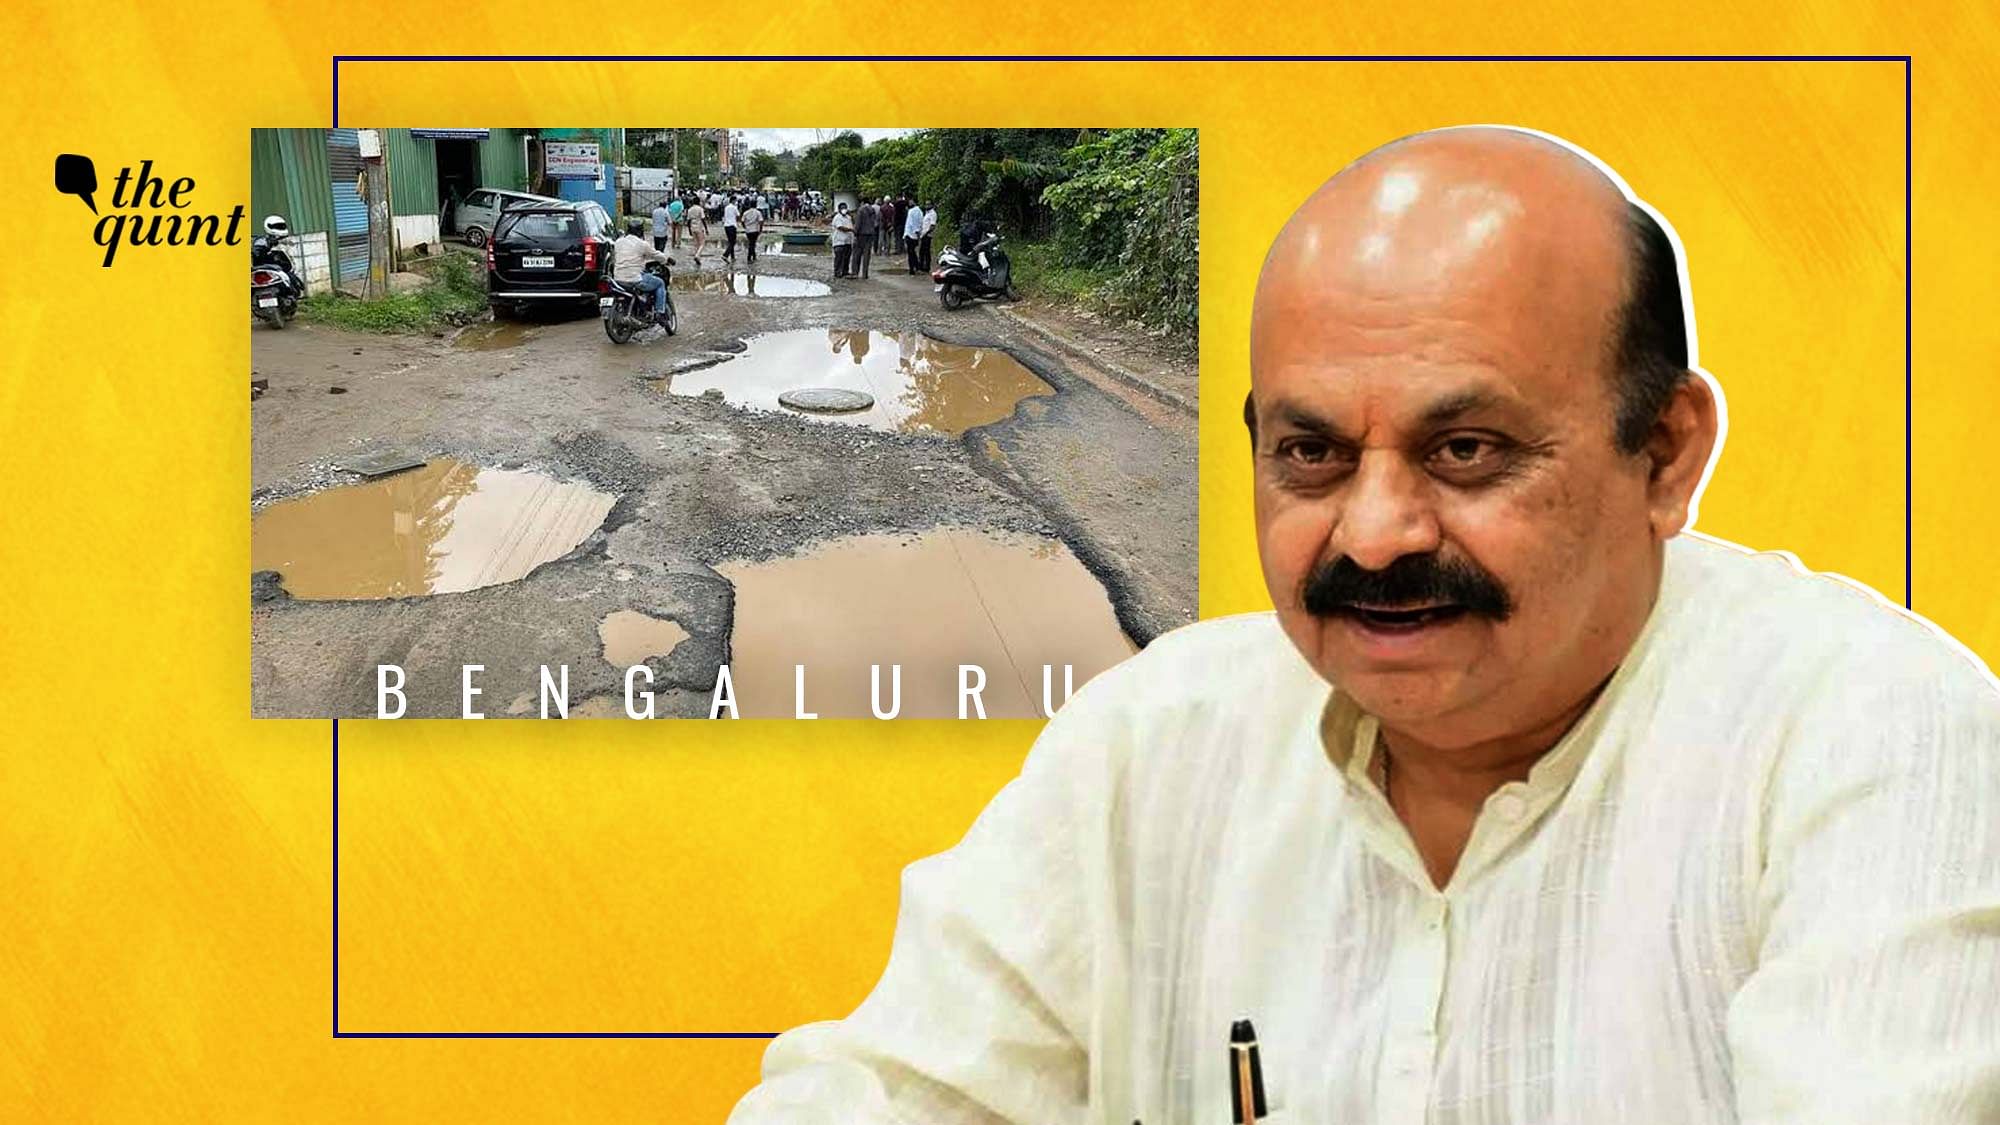 <div class="paragraphs"><p>Bad roads and potholes in Bengaluru have angered residents who have challenged Karnataka CM Basavaraj Bommai to visit parts of the city and take a look at the ‘mess’.</p></div>